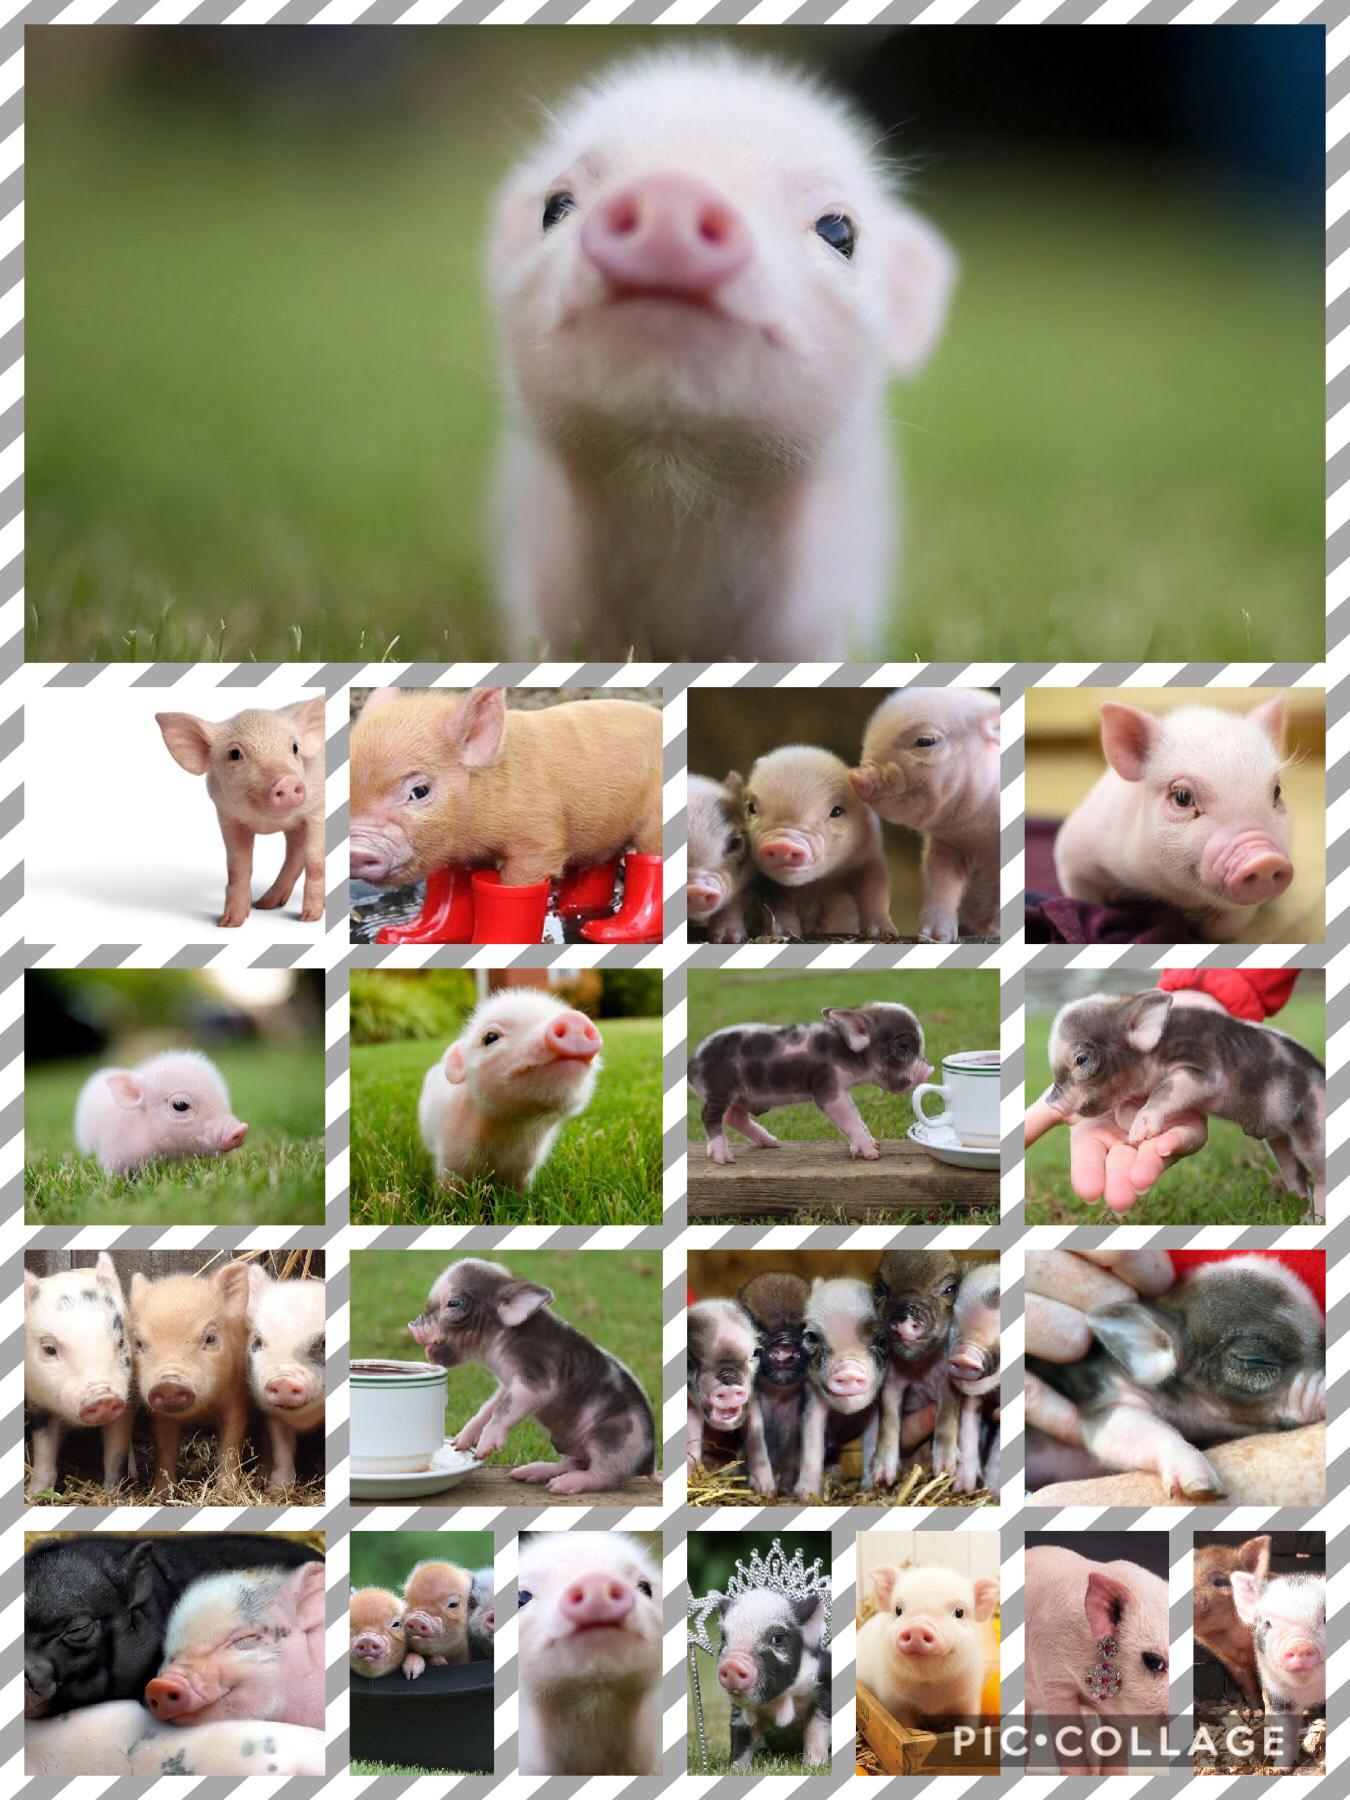 Pigs 🐖 are so cute I just want one!!!
